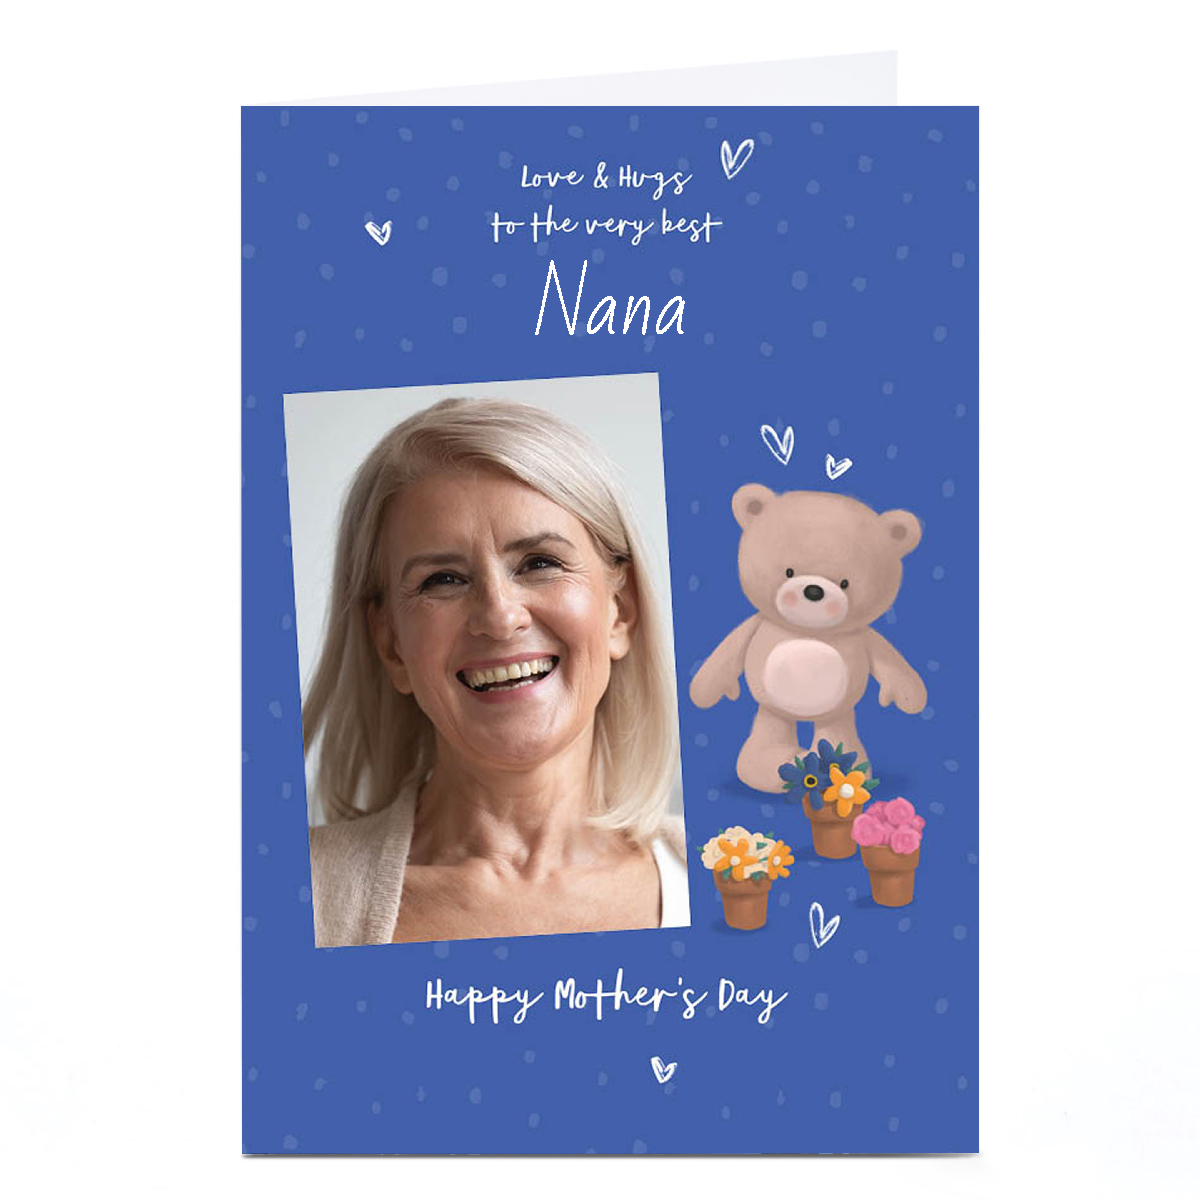 Personalised Mother's Day Card - Hugs Bear with flowers - Nana